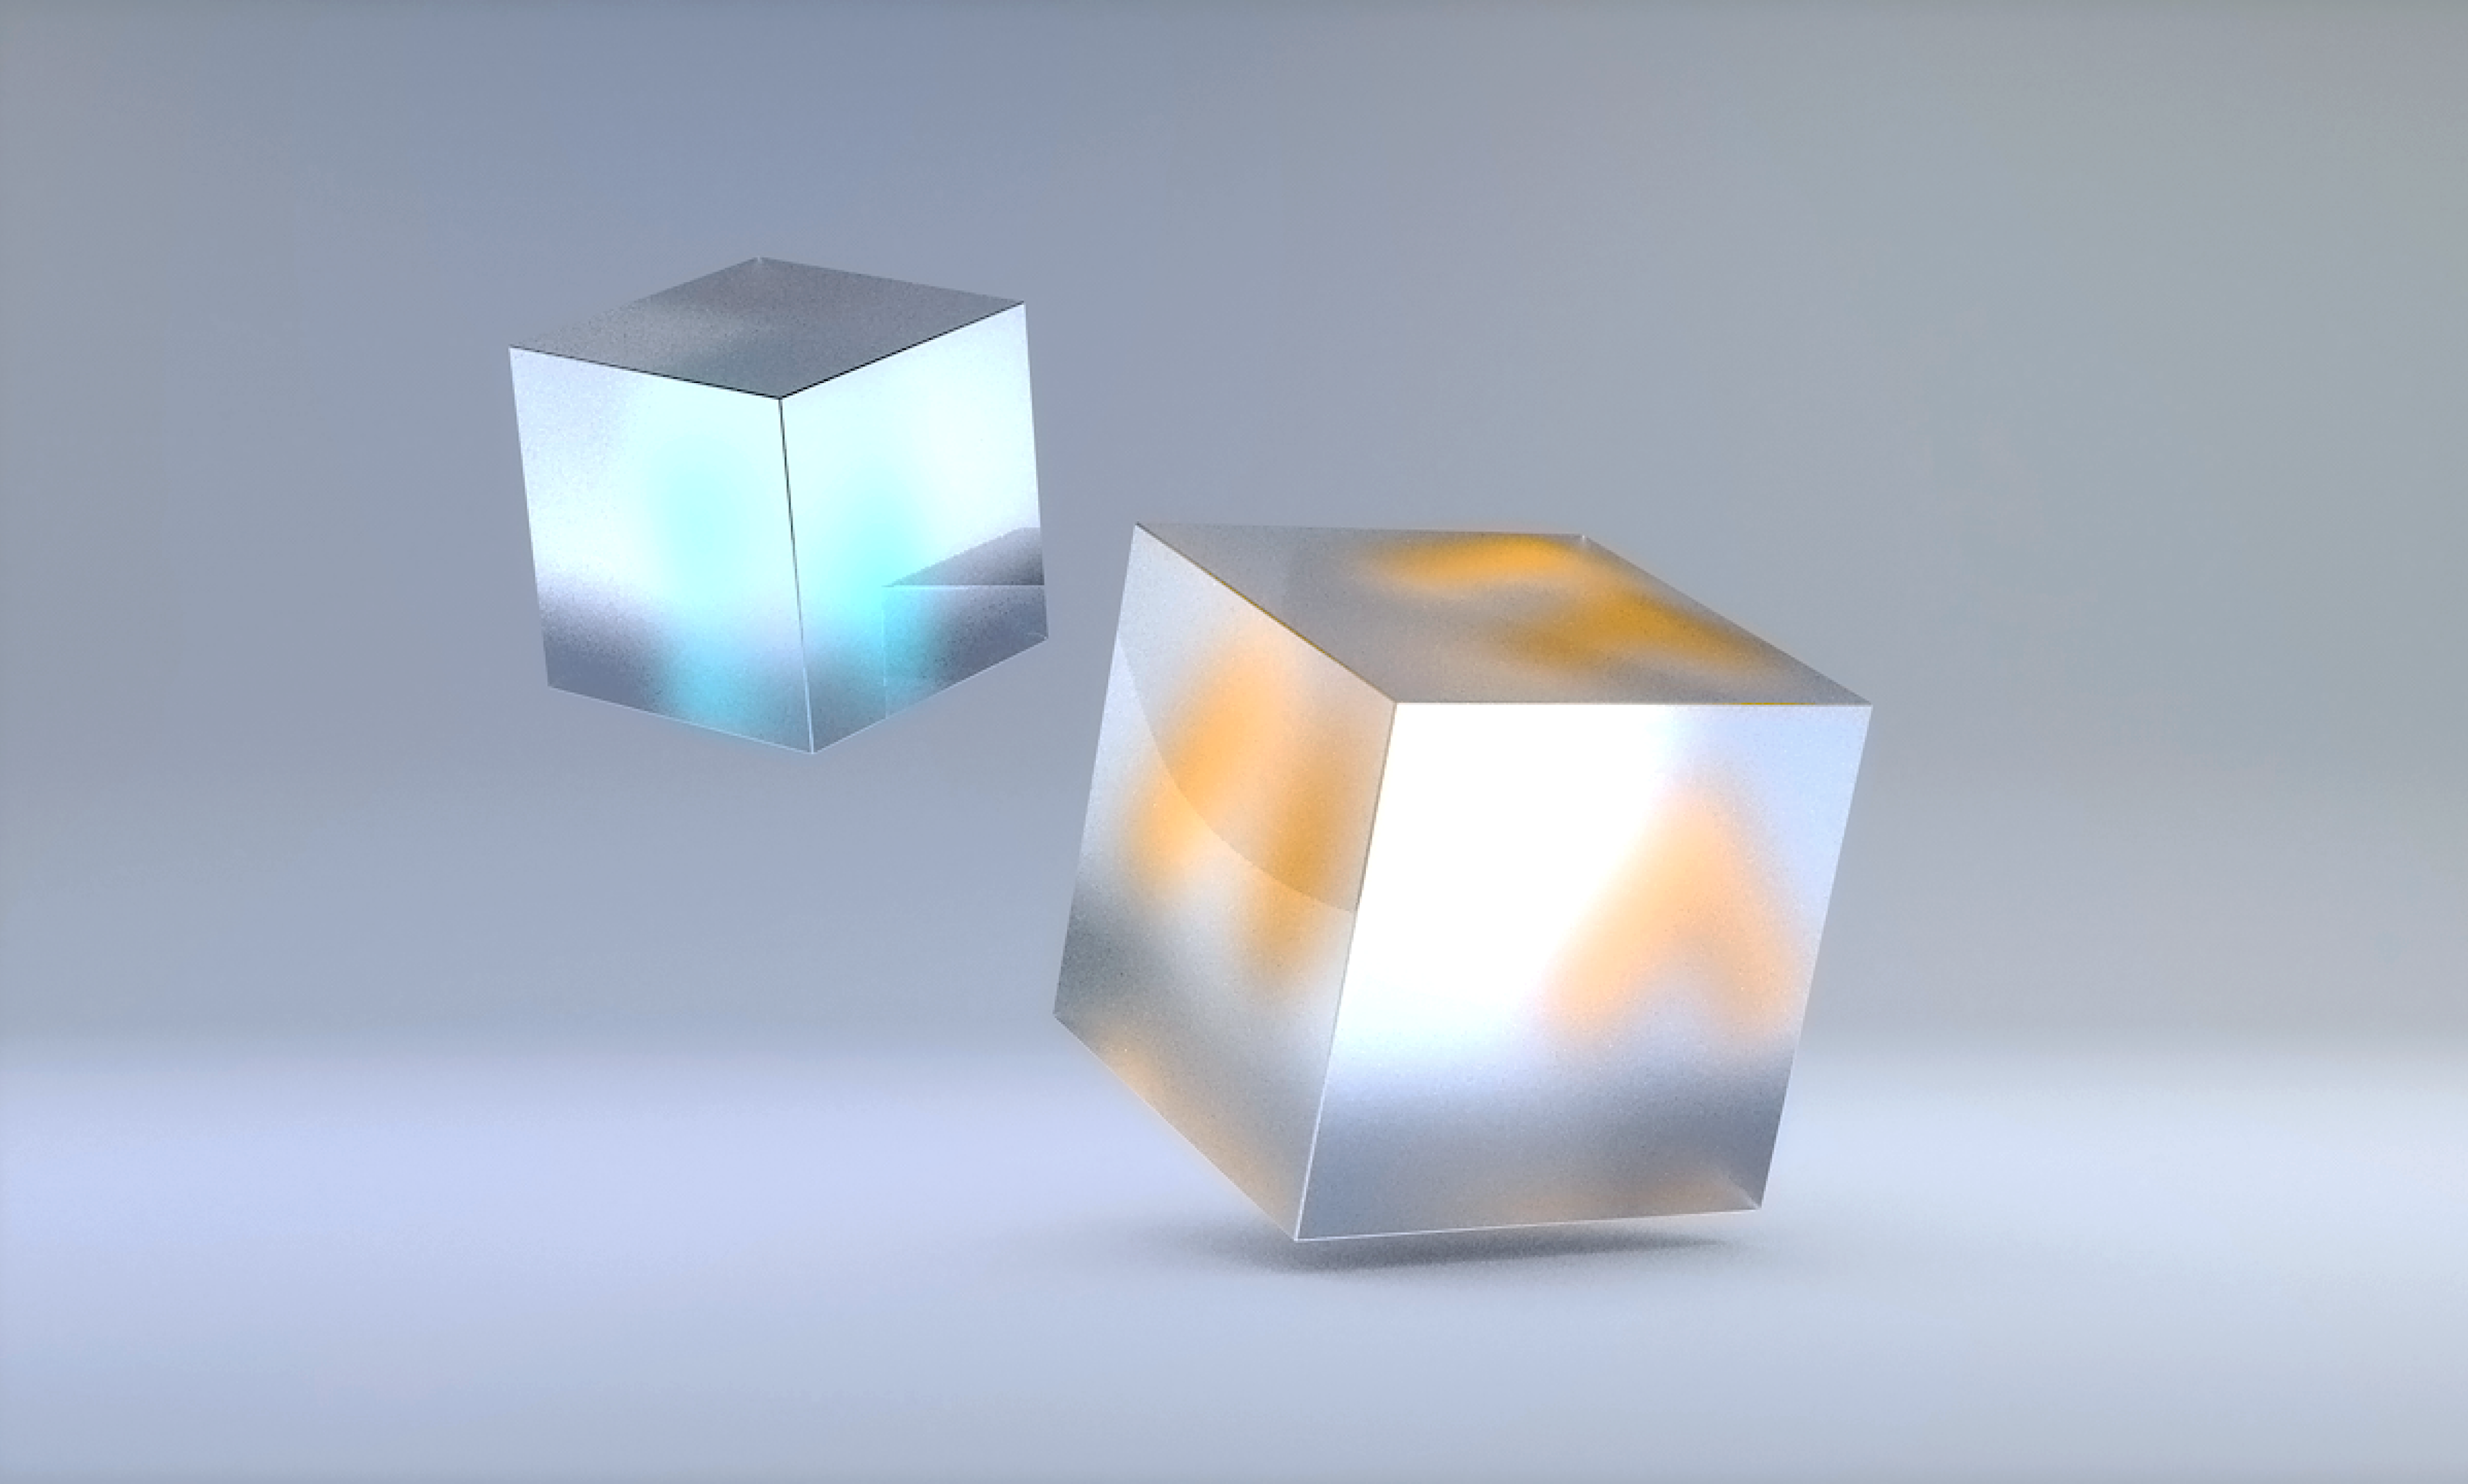 A floating orange cube and blue cube on a grey background